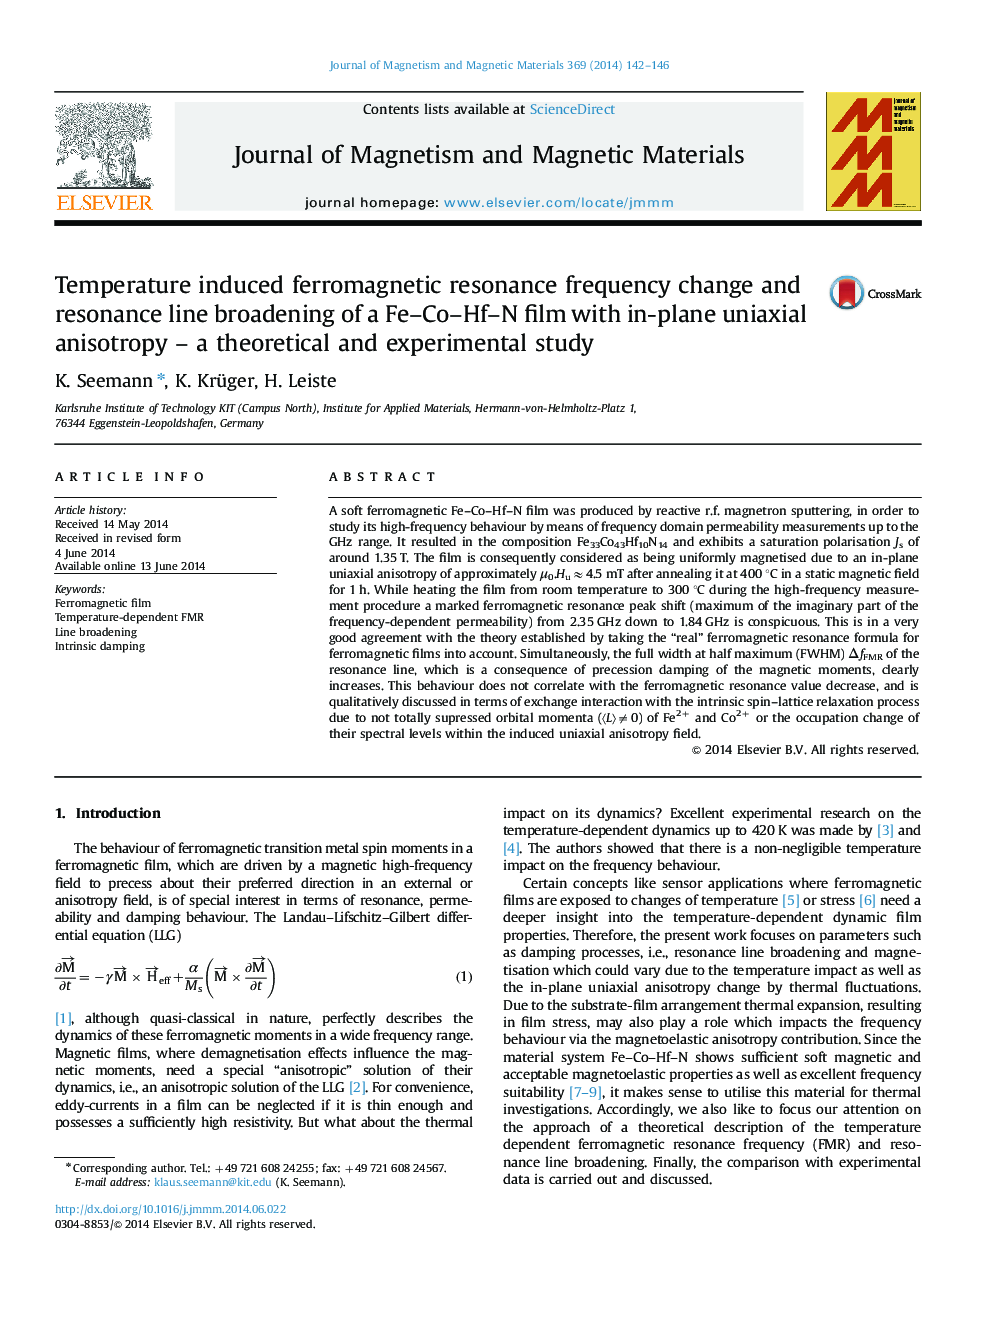 Temperature induced ferromagnetic resonance frequency change and resonance line broadening of a Fe–Co–Hf–N film with in-plane uniaxial anisotropy – a theoretical and experimental study